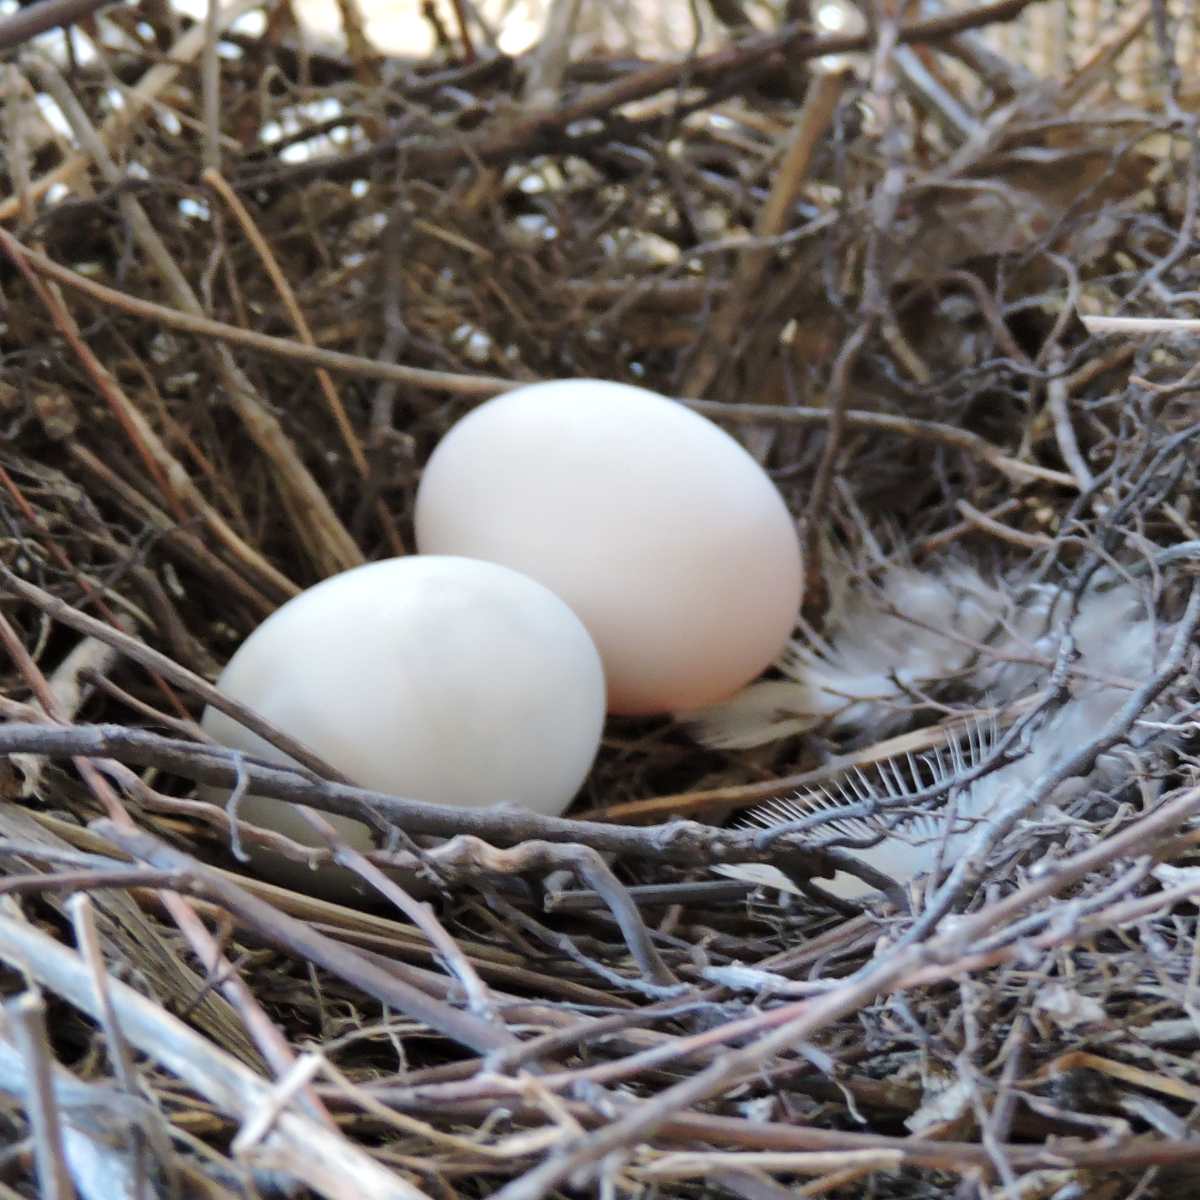 Two dove eggs in a nest.